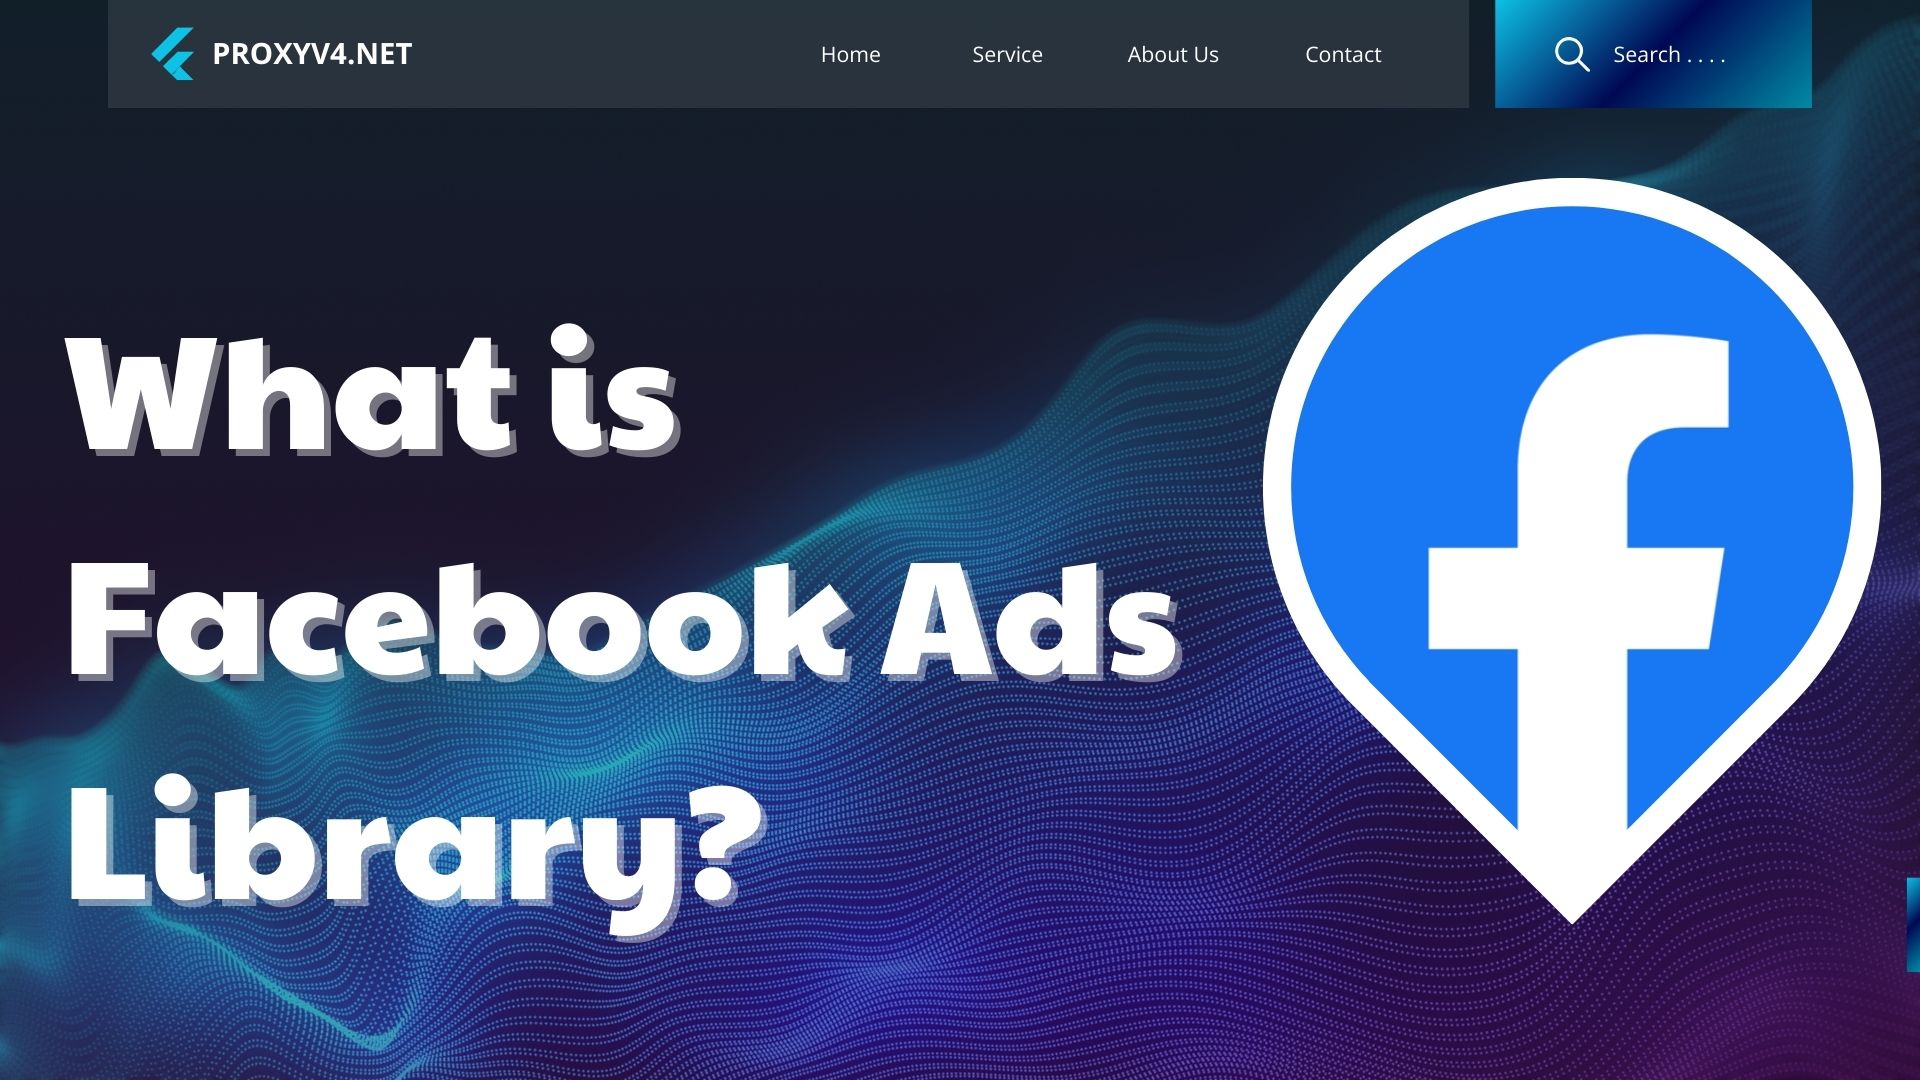 What is Facebook Ads Library?